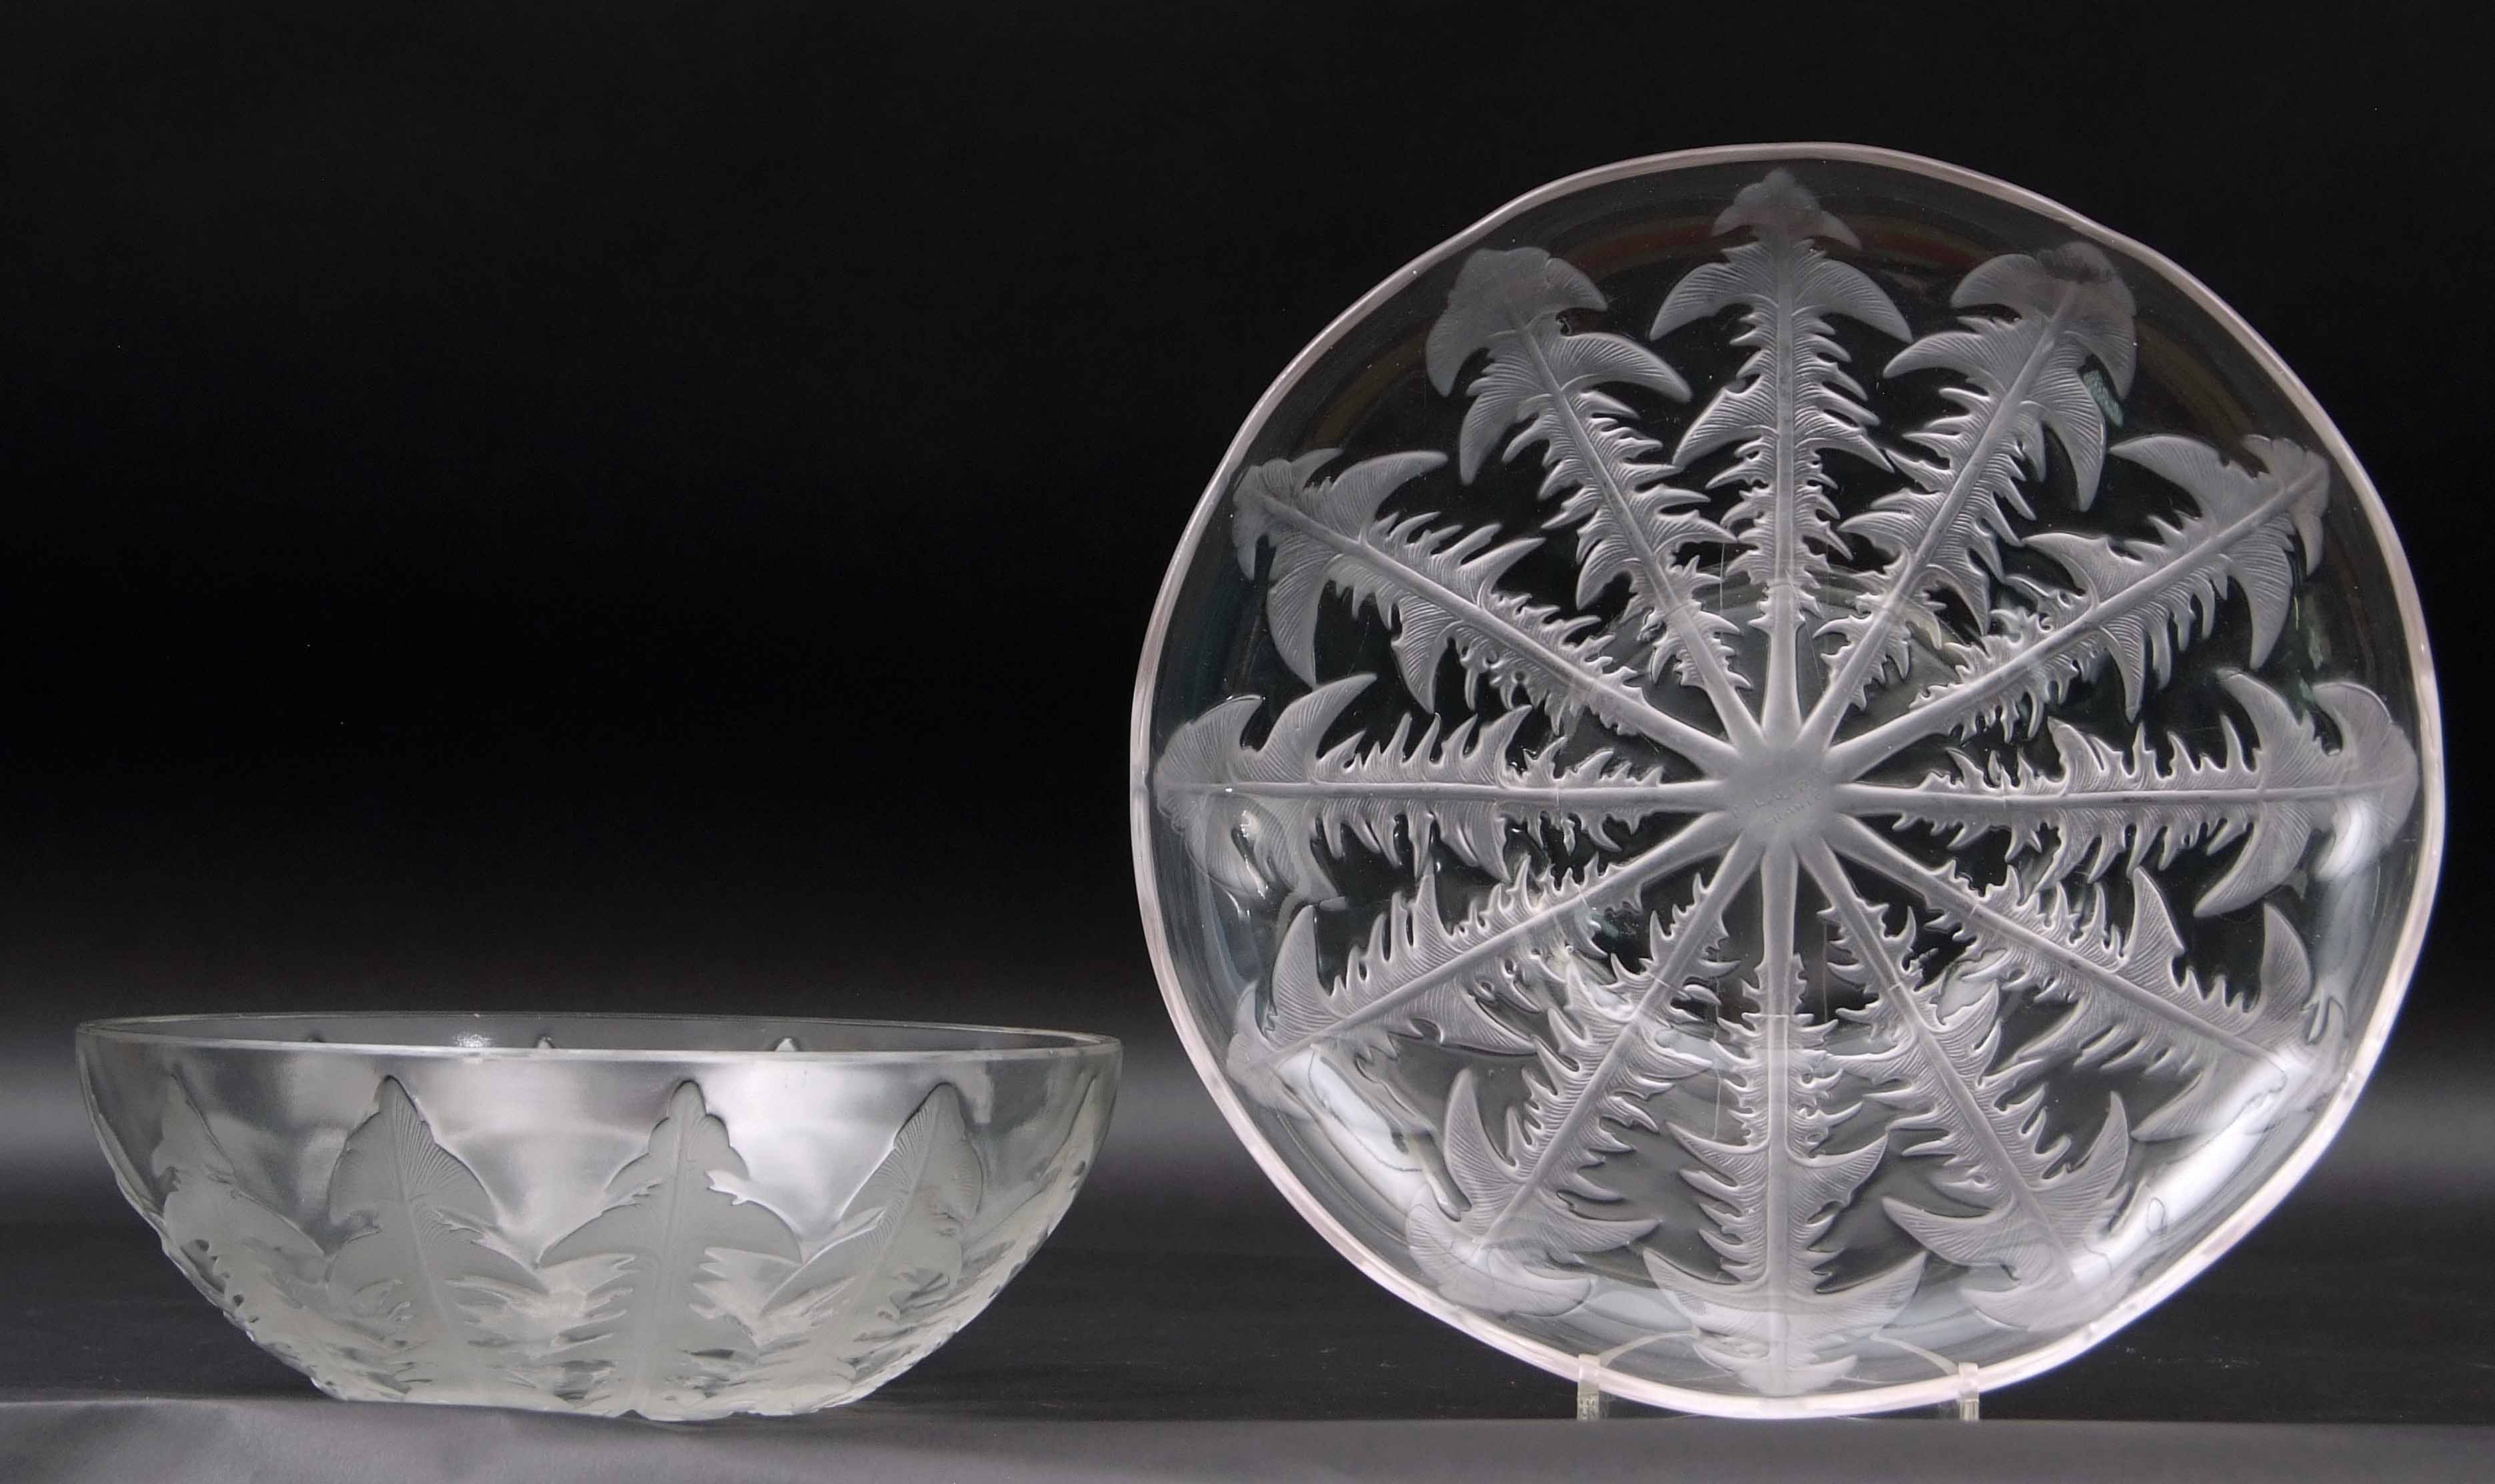 Lalique bowl moulded with thistles, together with a large Lalique dish, again moulded with - Image 3 of 3